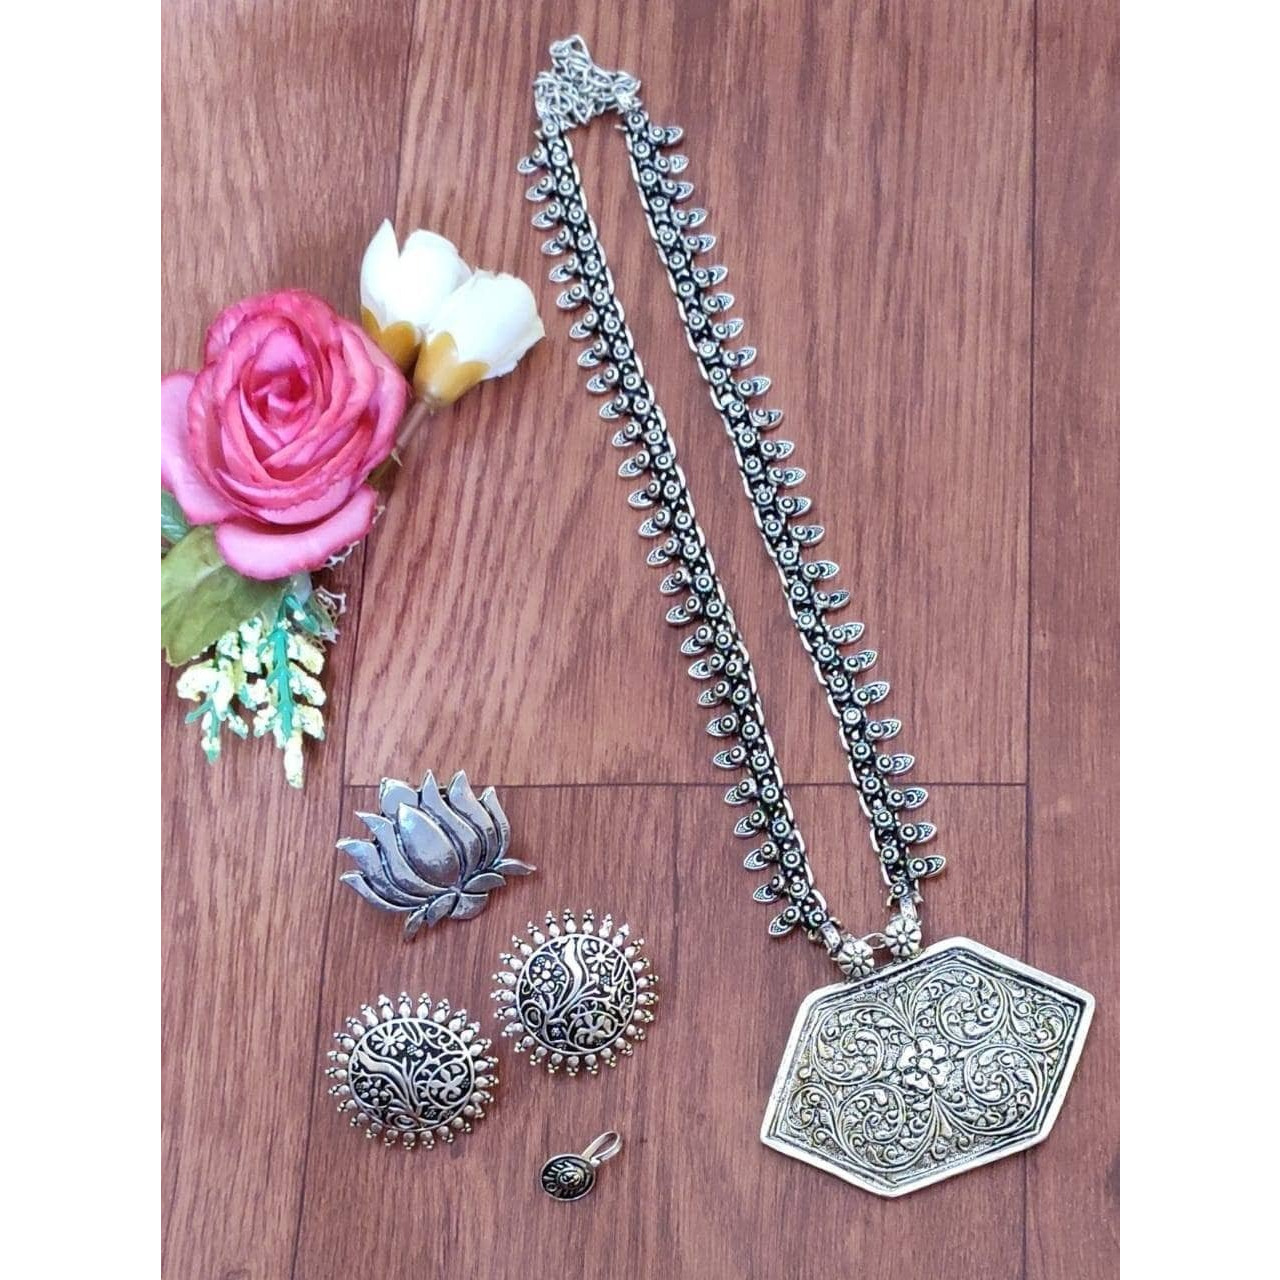 This beautiful set of 6 has a big long Haram necklace with a choker silver necklace, pair of jhumka earrings, a ring,pair of bangles, and a nose pin.Grab this beautiful set with any of the ethnic/ Indo western outfit and look unique in the crowdPremium quality set!!